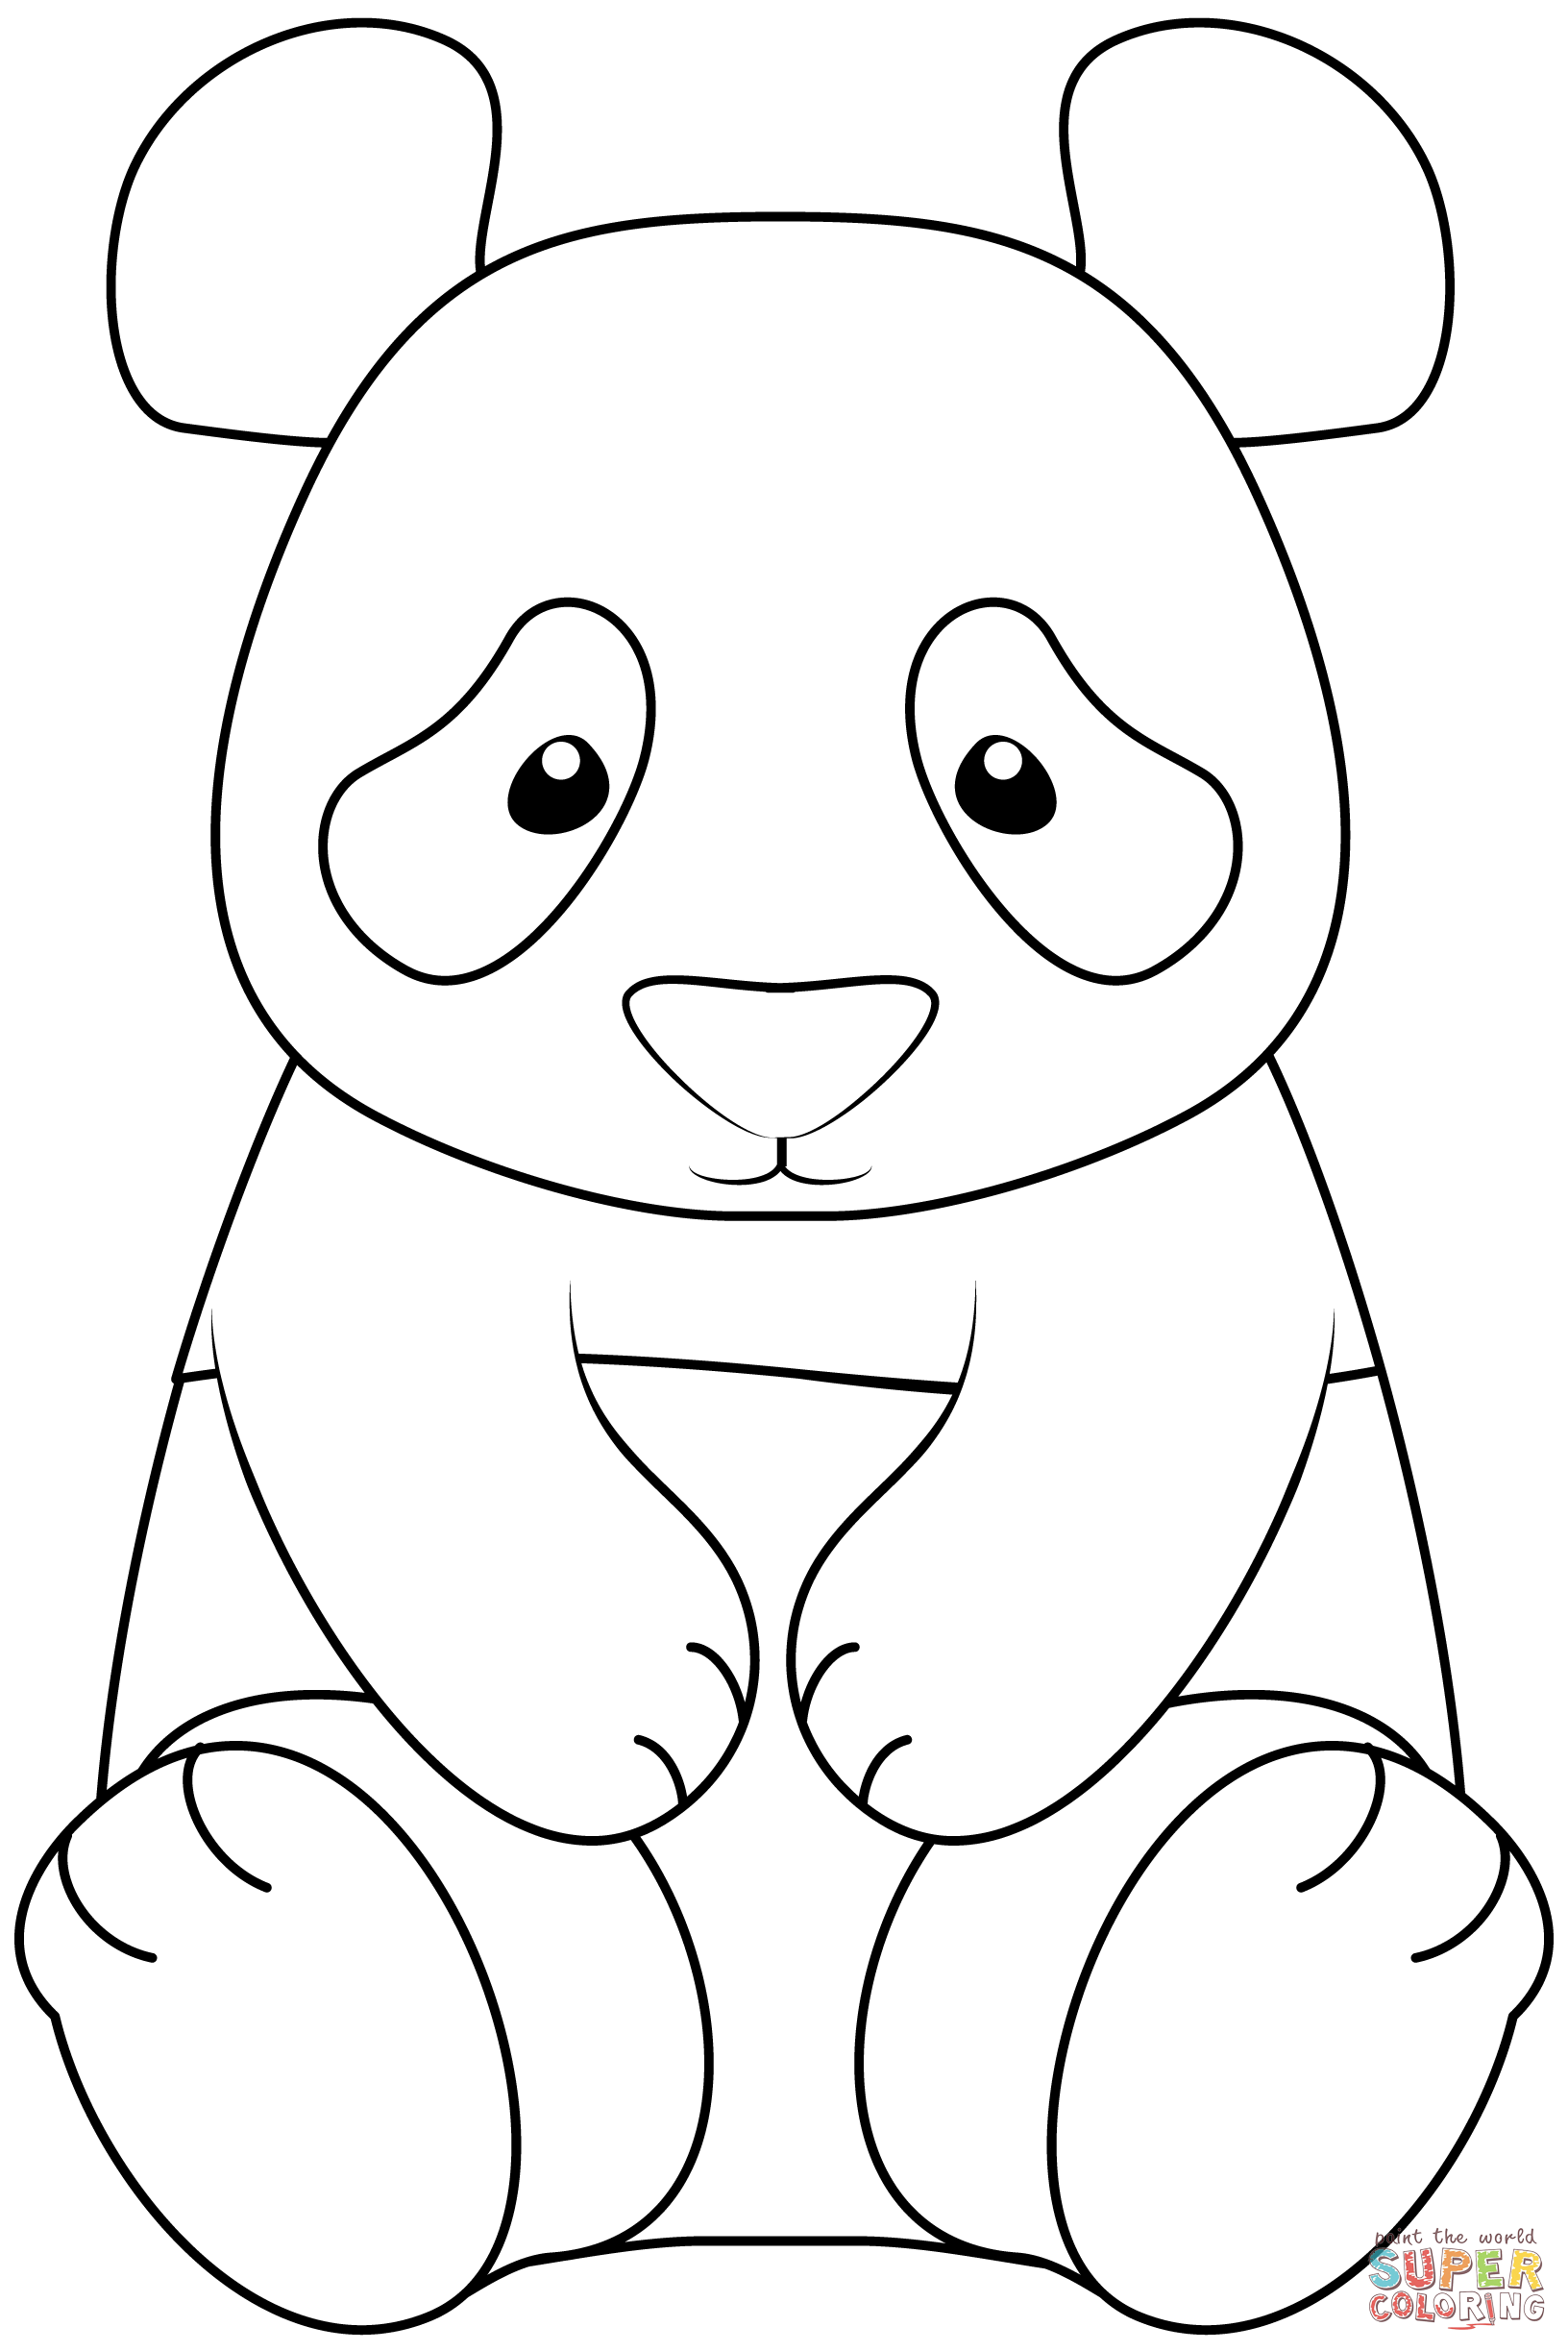 Panda coloring page free printable coloring pages